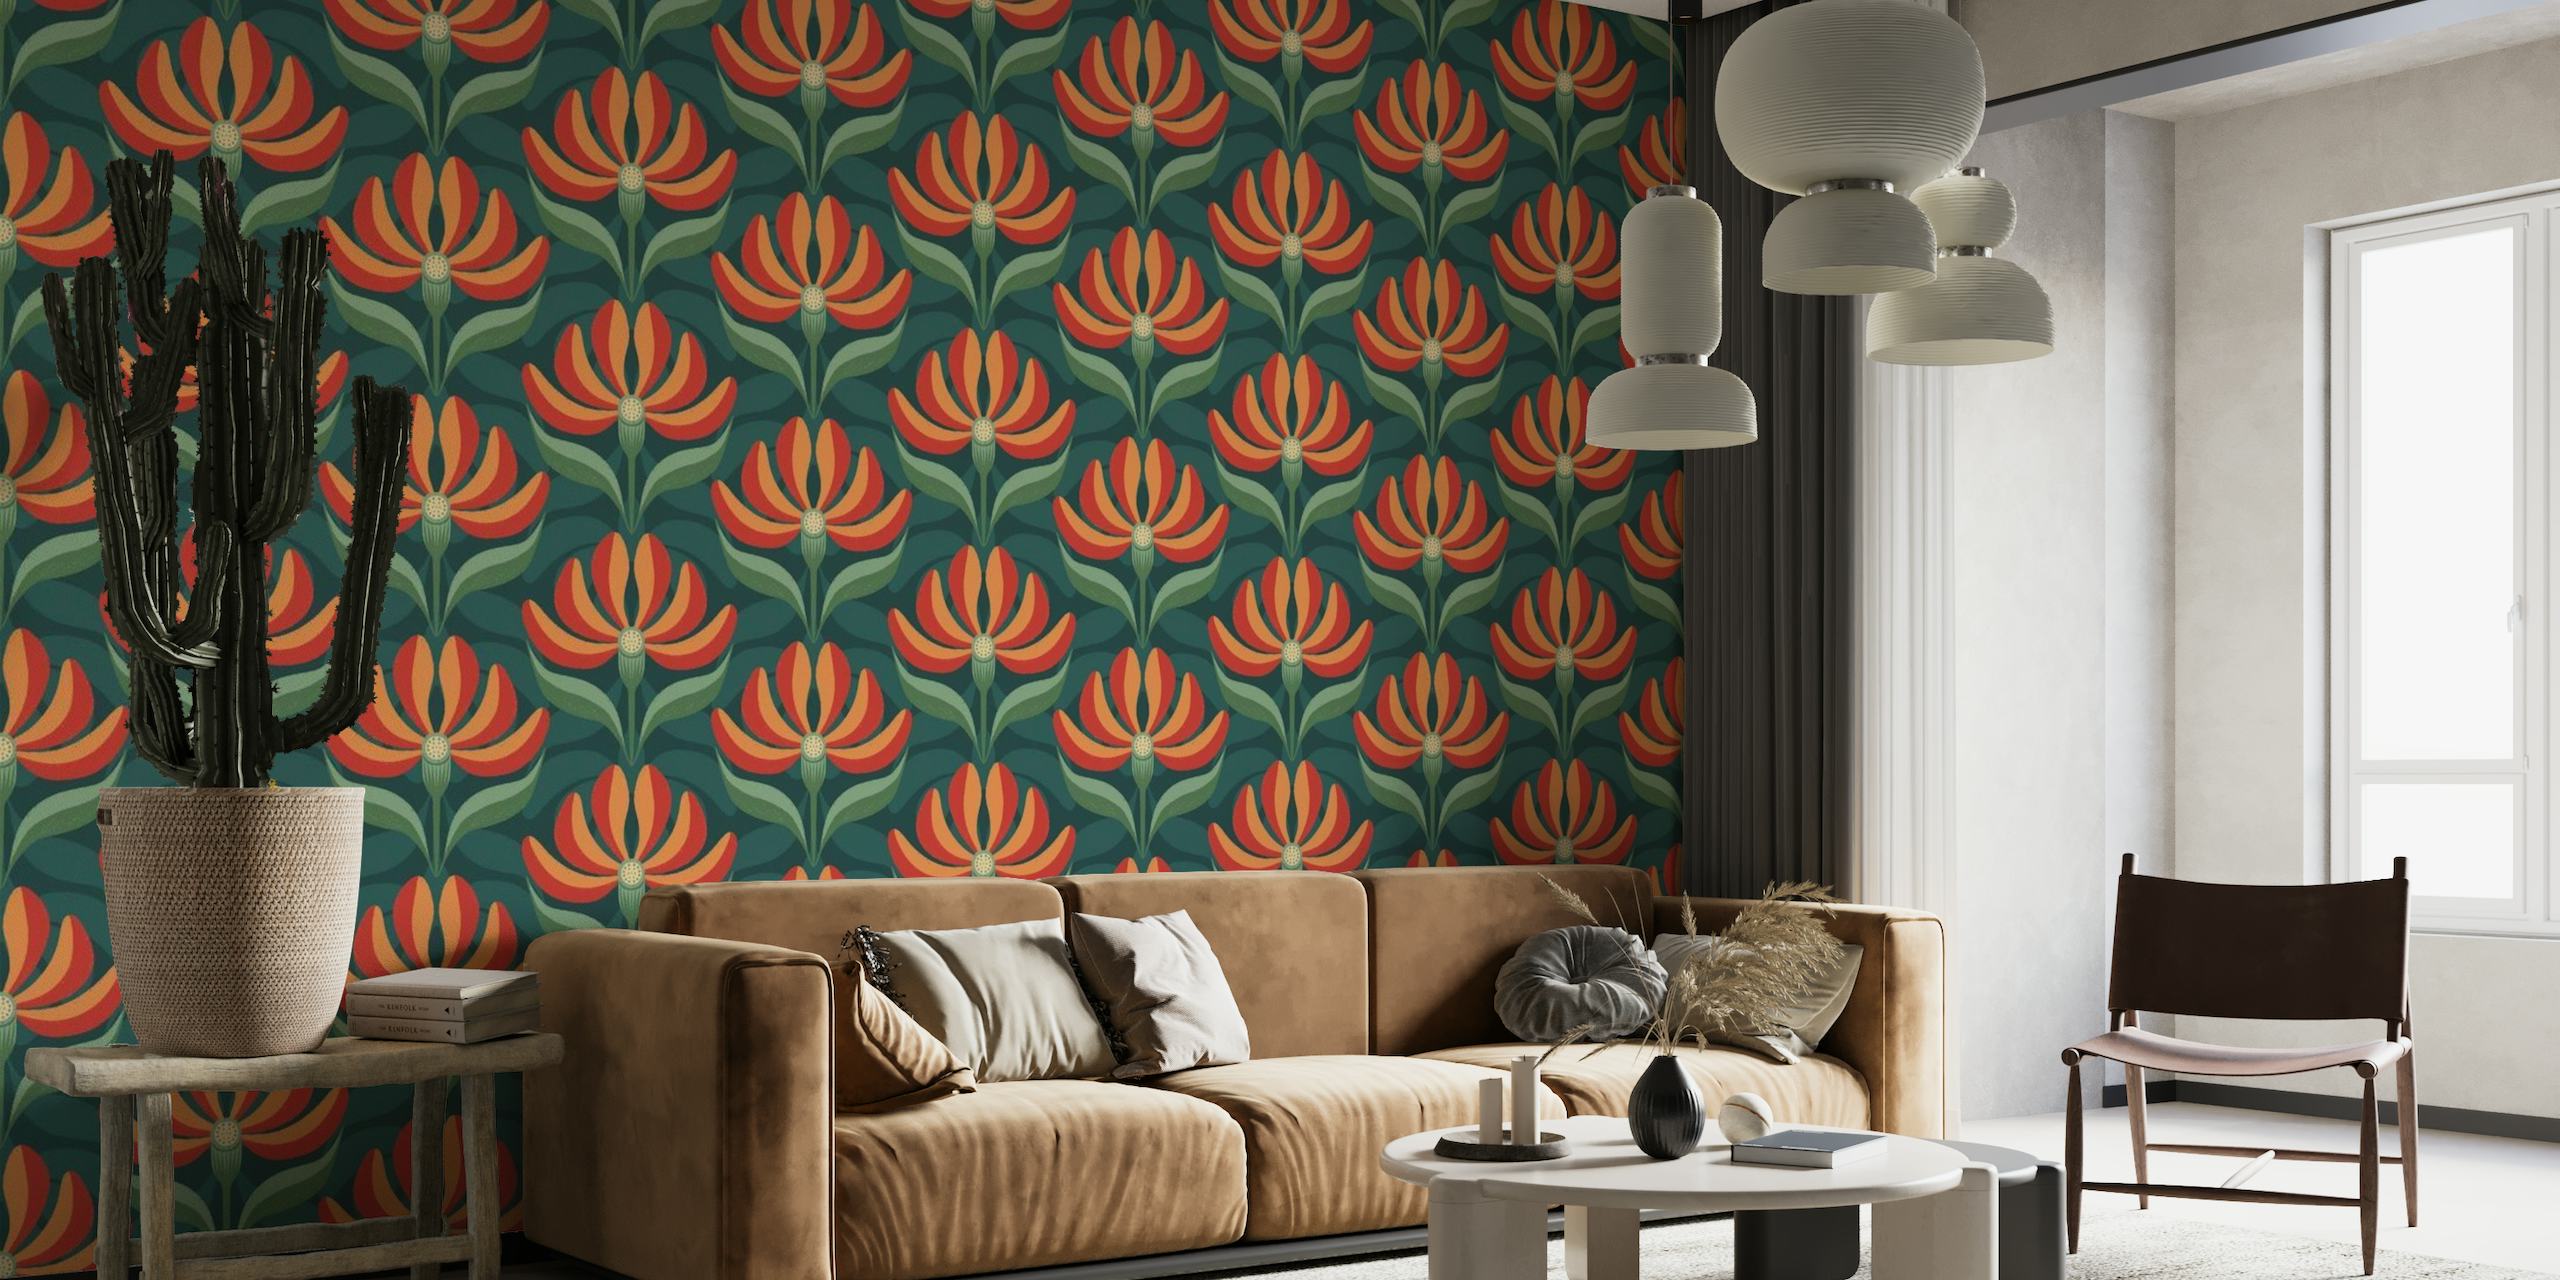 retro-style geometric floral pattern wall mural in teal, green, red, and orange